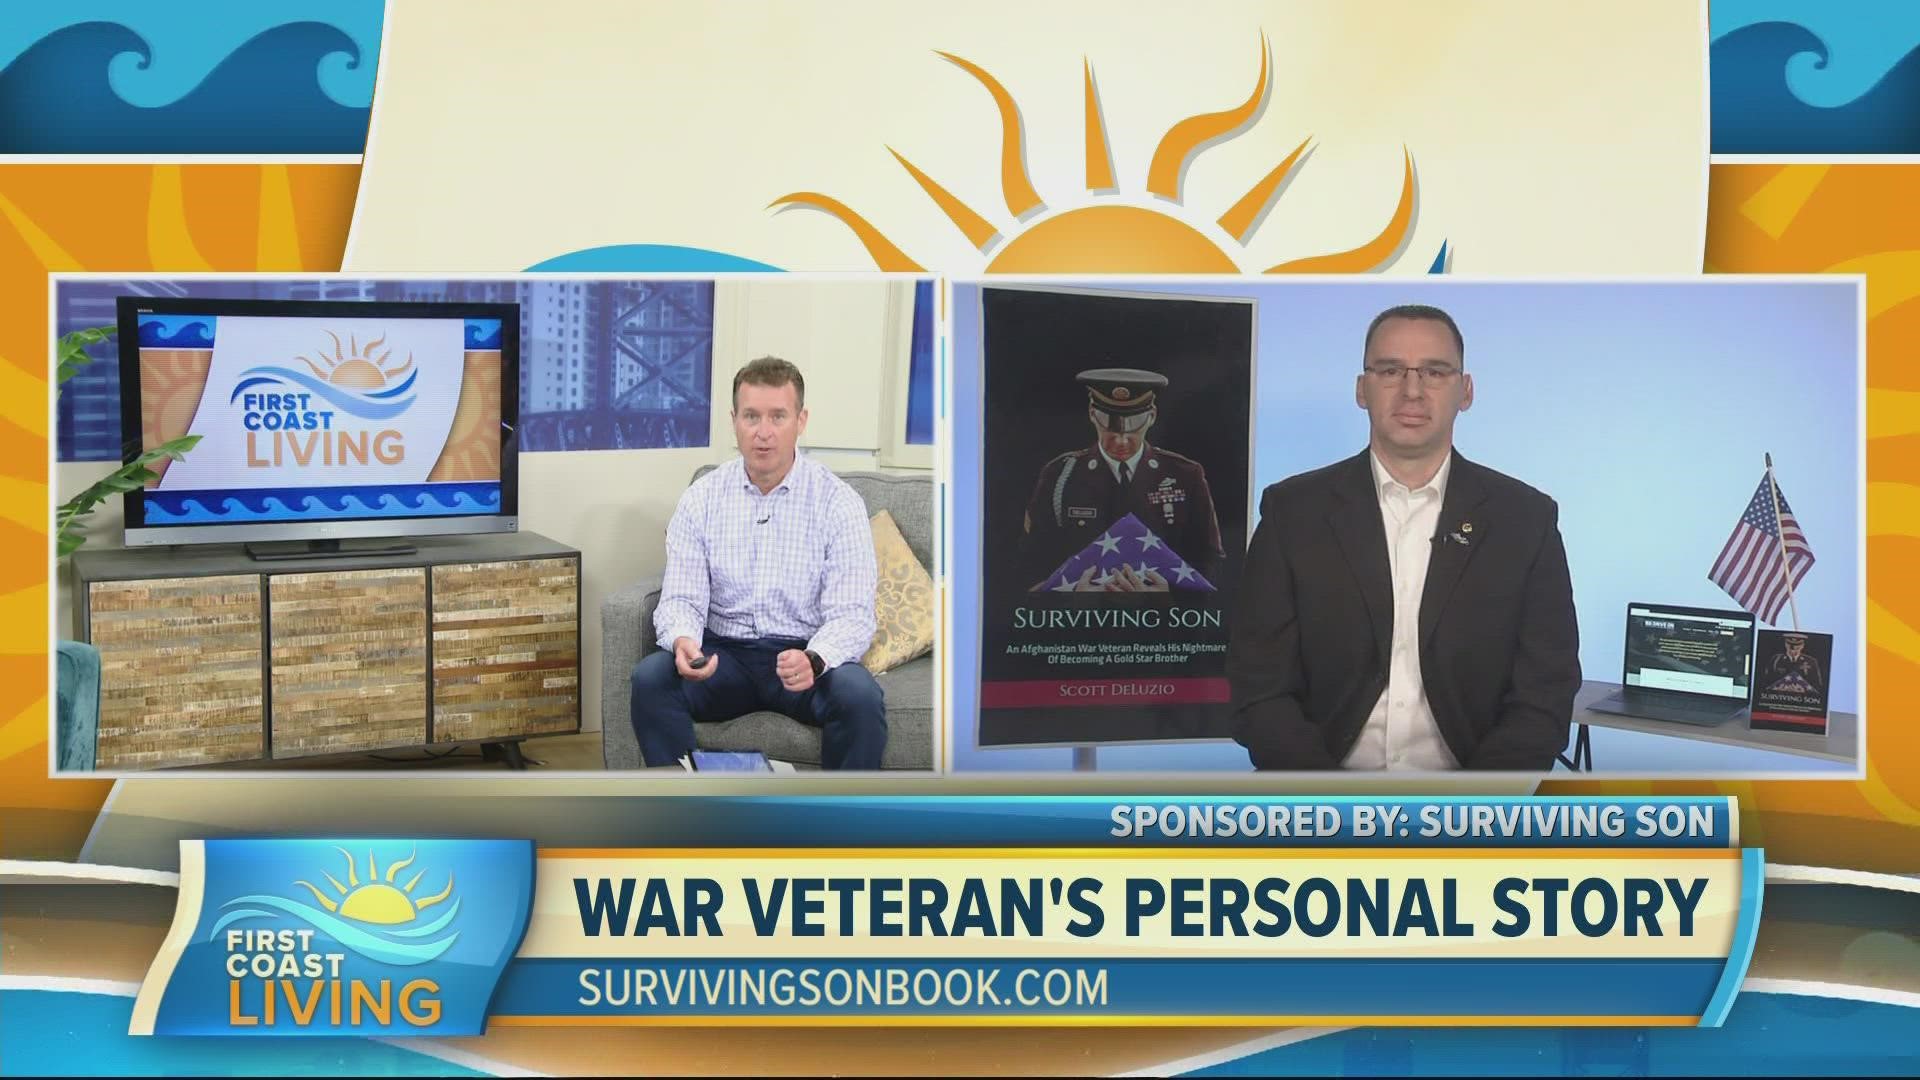 Veteran and Gold Star brother Scott Deluzio gives us his perspective on the War in Afghanistan and his message of hope in his new book Surviving Son.